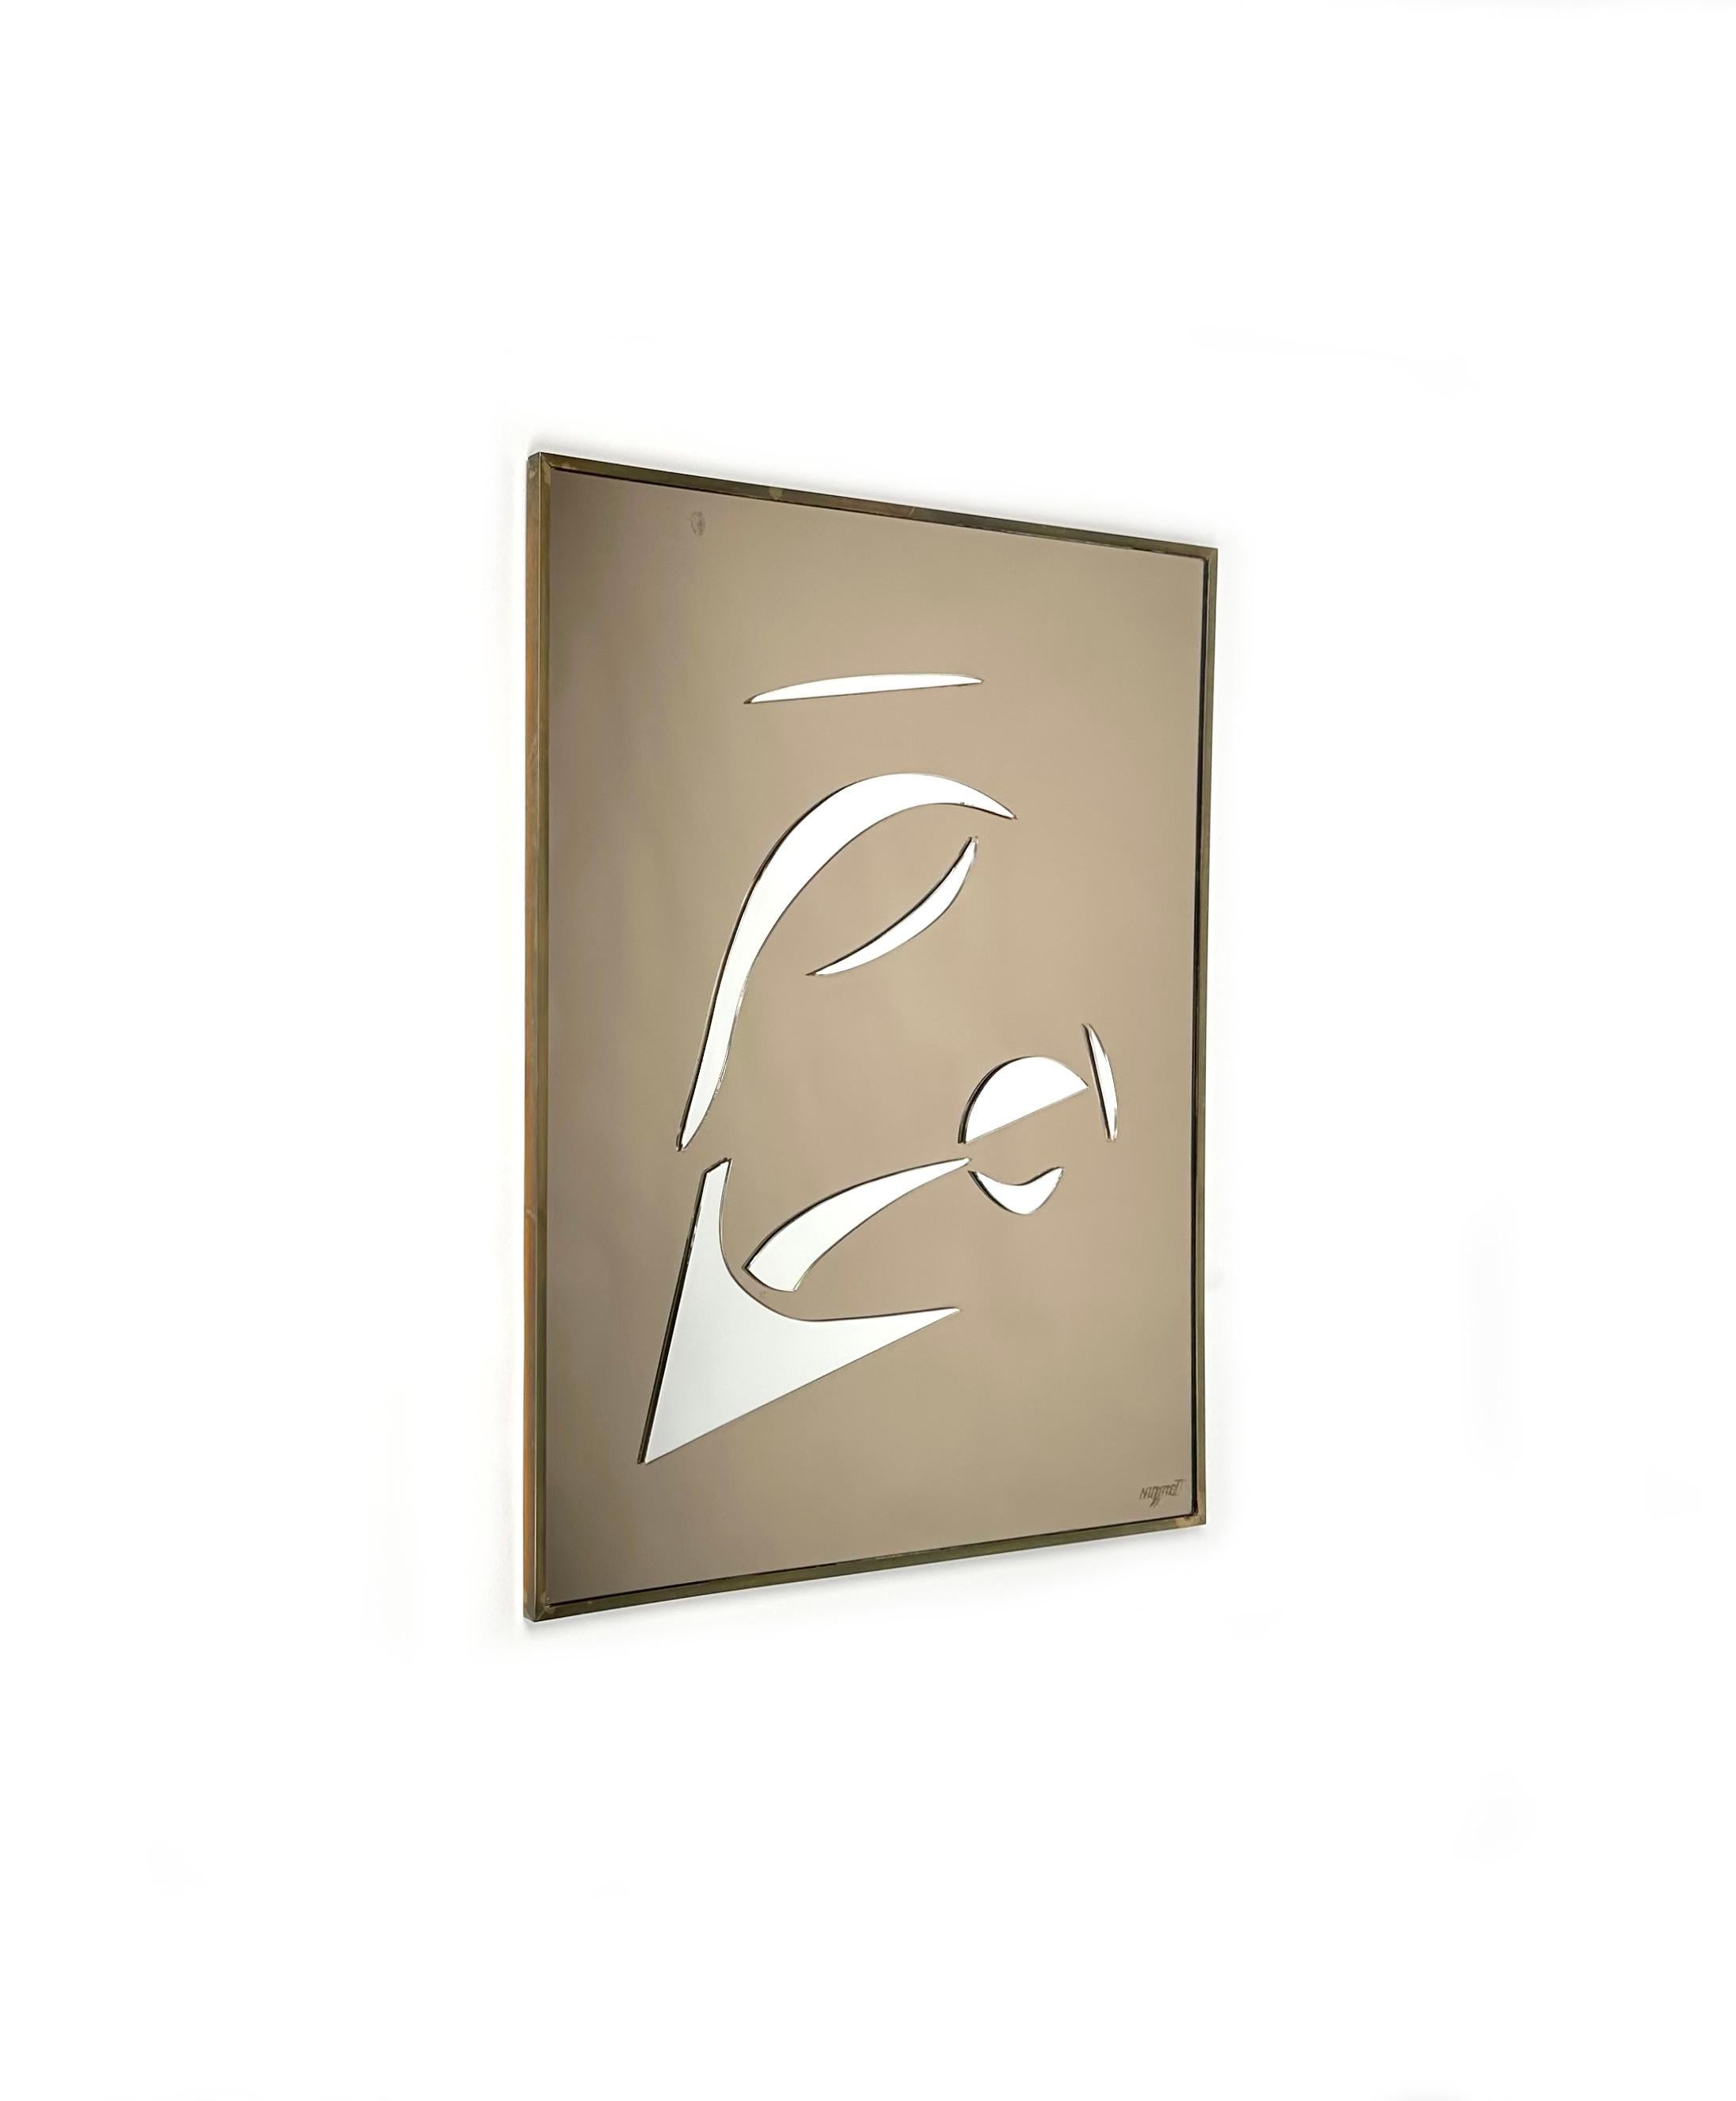 Mid-Century Modern Rectangular Wall Mirror by Romeo Rega for Nazaret, Italy 1970s For Sale